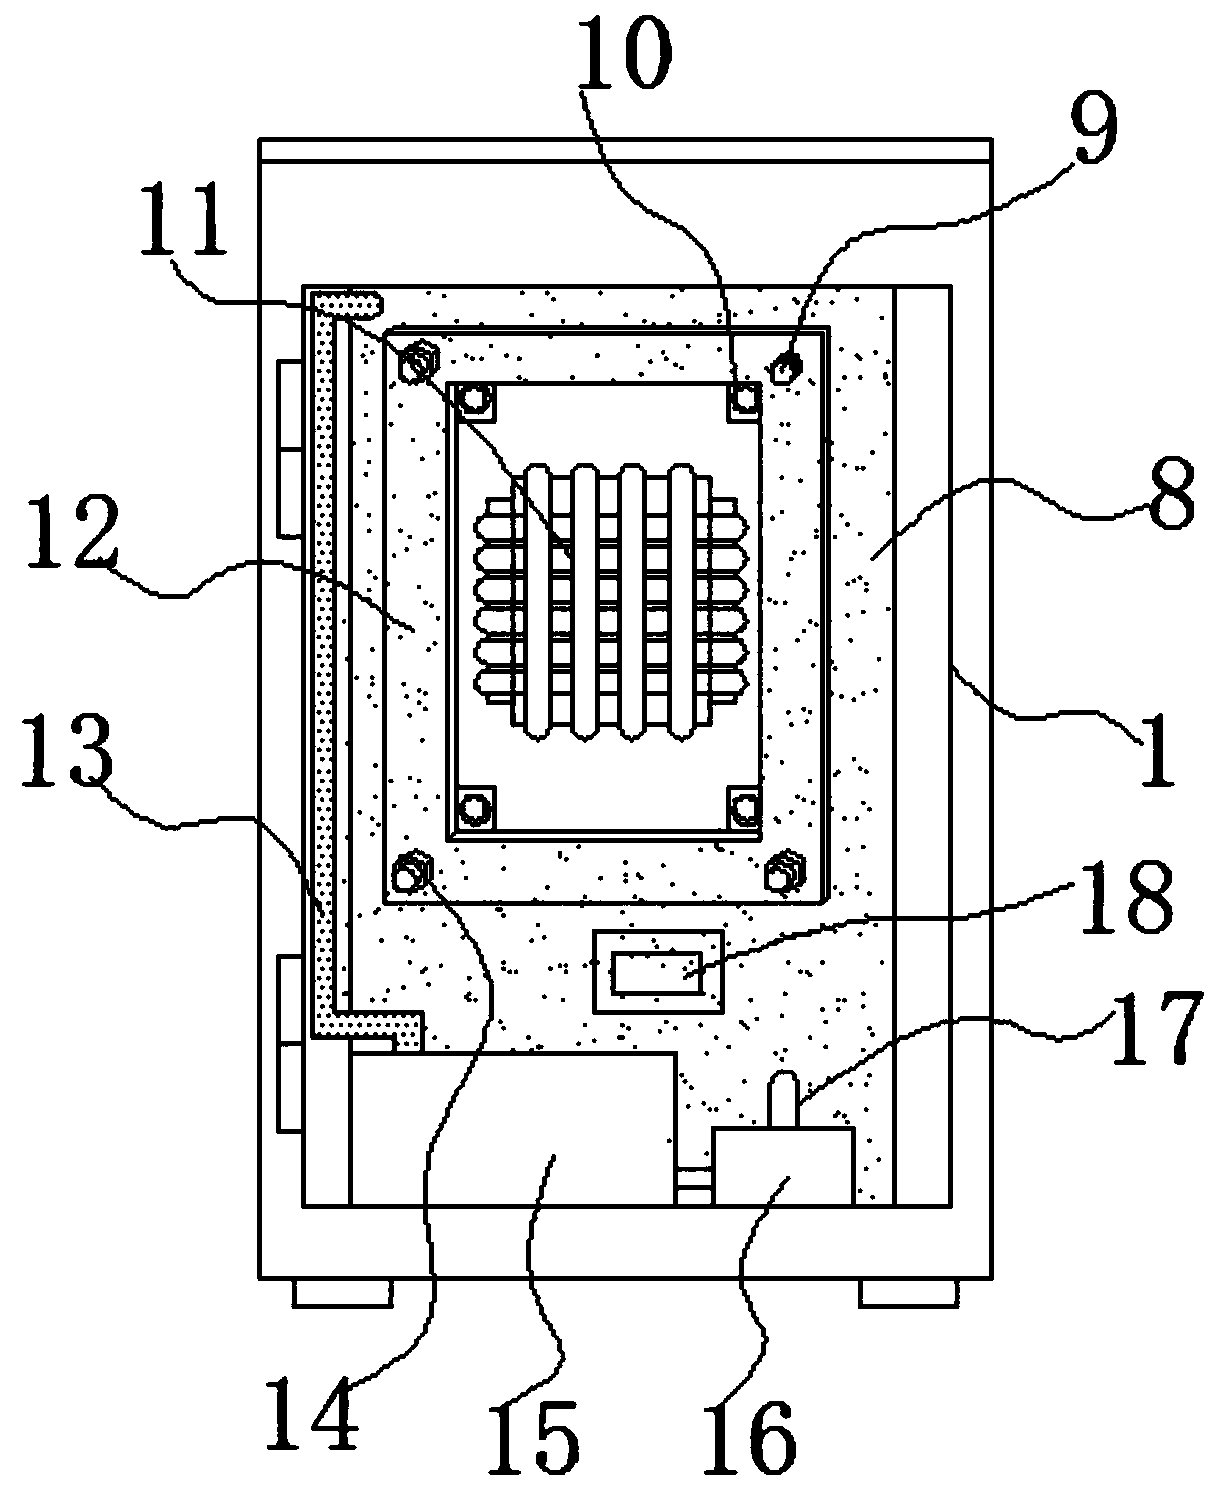 Novel box-type substation heat dissipation device with self-contained power supply